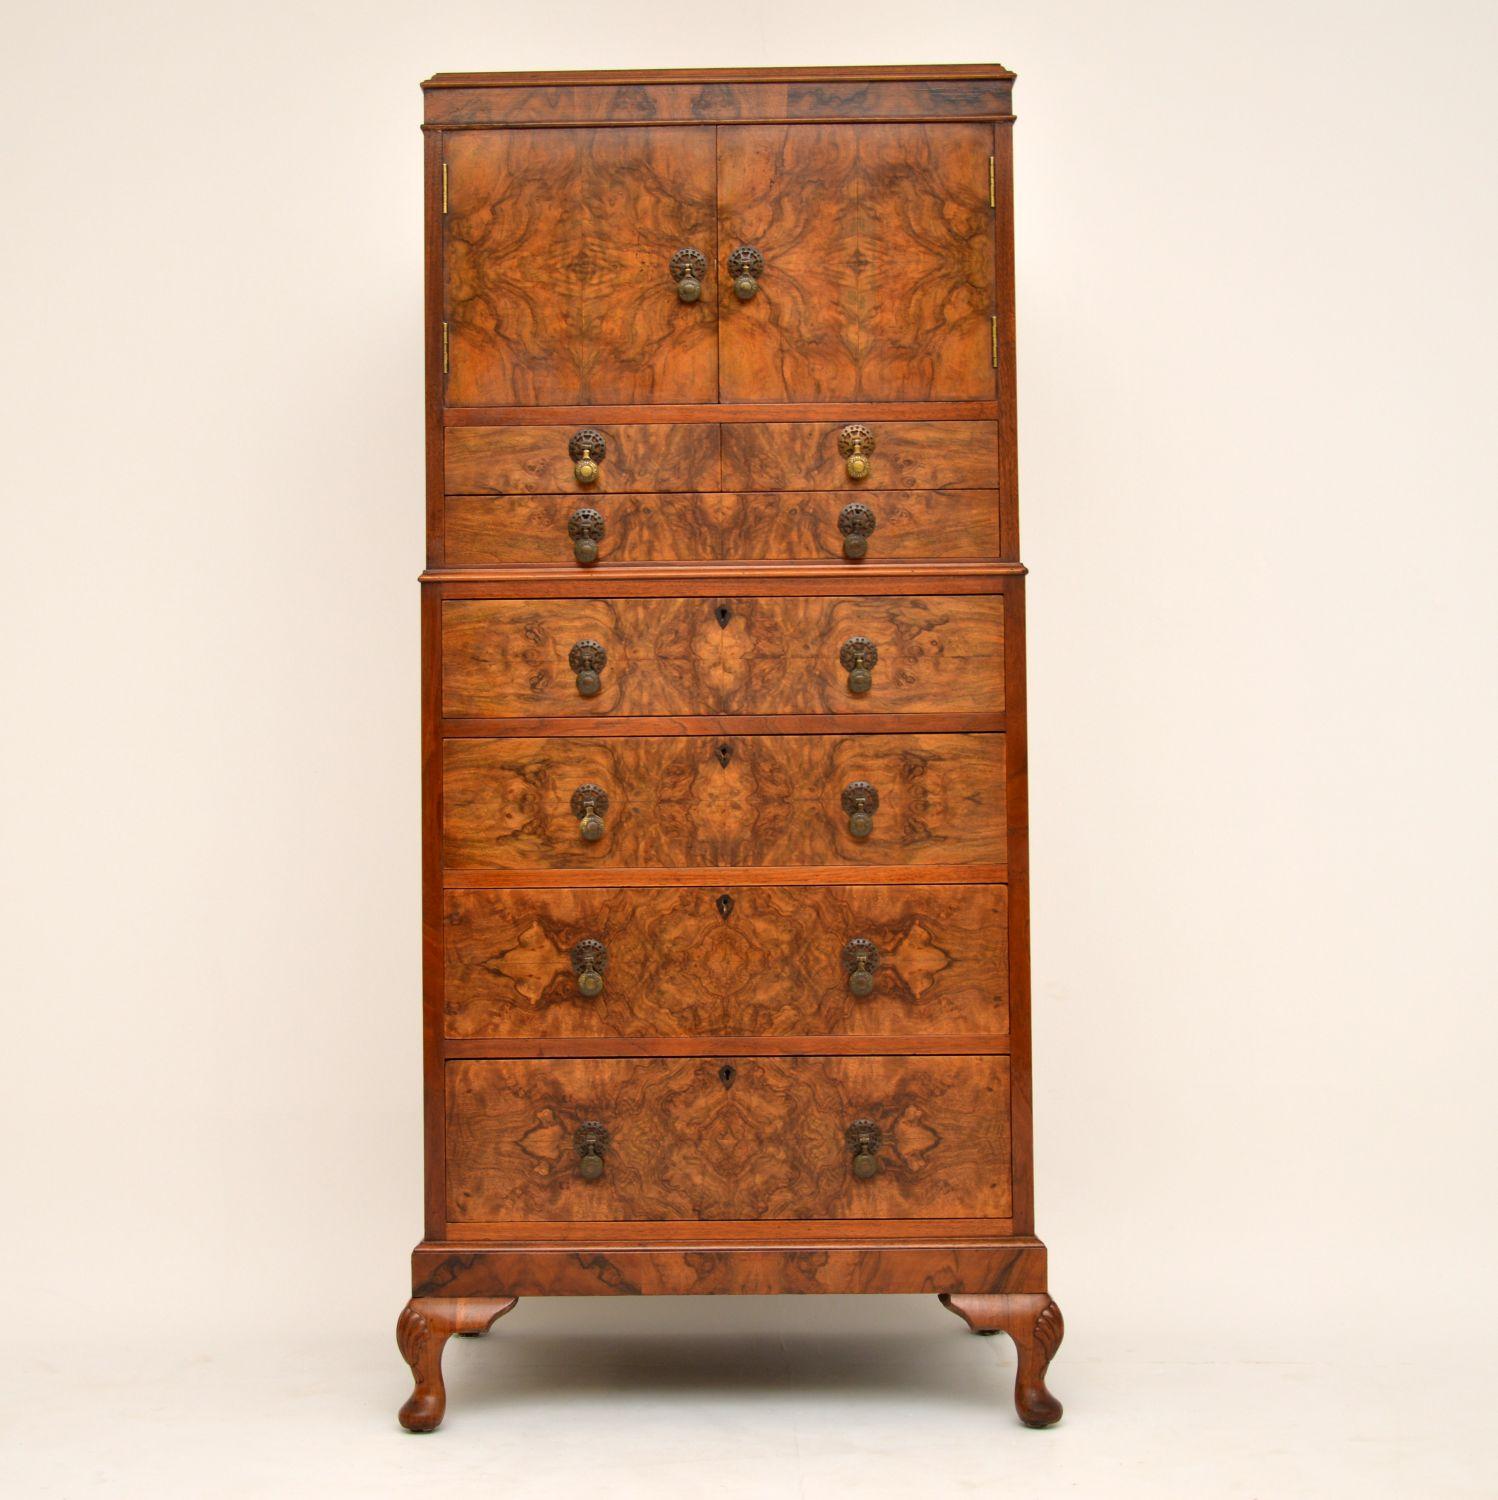 This antique walnut cabinet on chest is a really nice compact piece of furniture and has a terrific burr walnut grain pattern running all down the front section. Please enlarge all the images to appreciate the fine details. There is a small cupboard